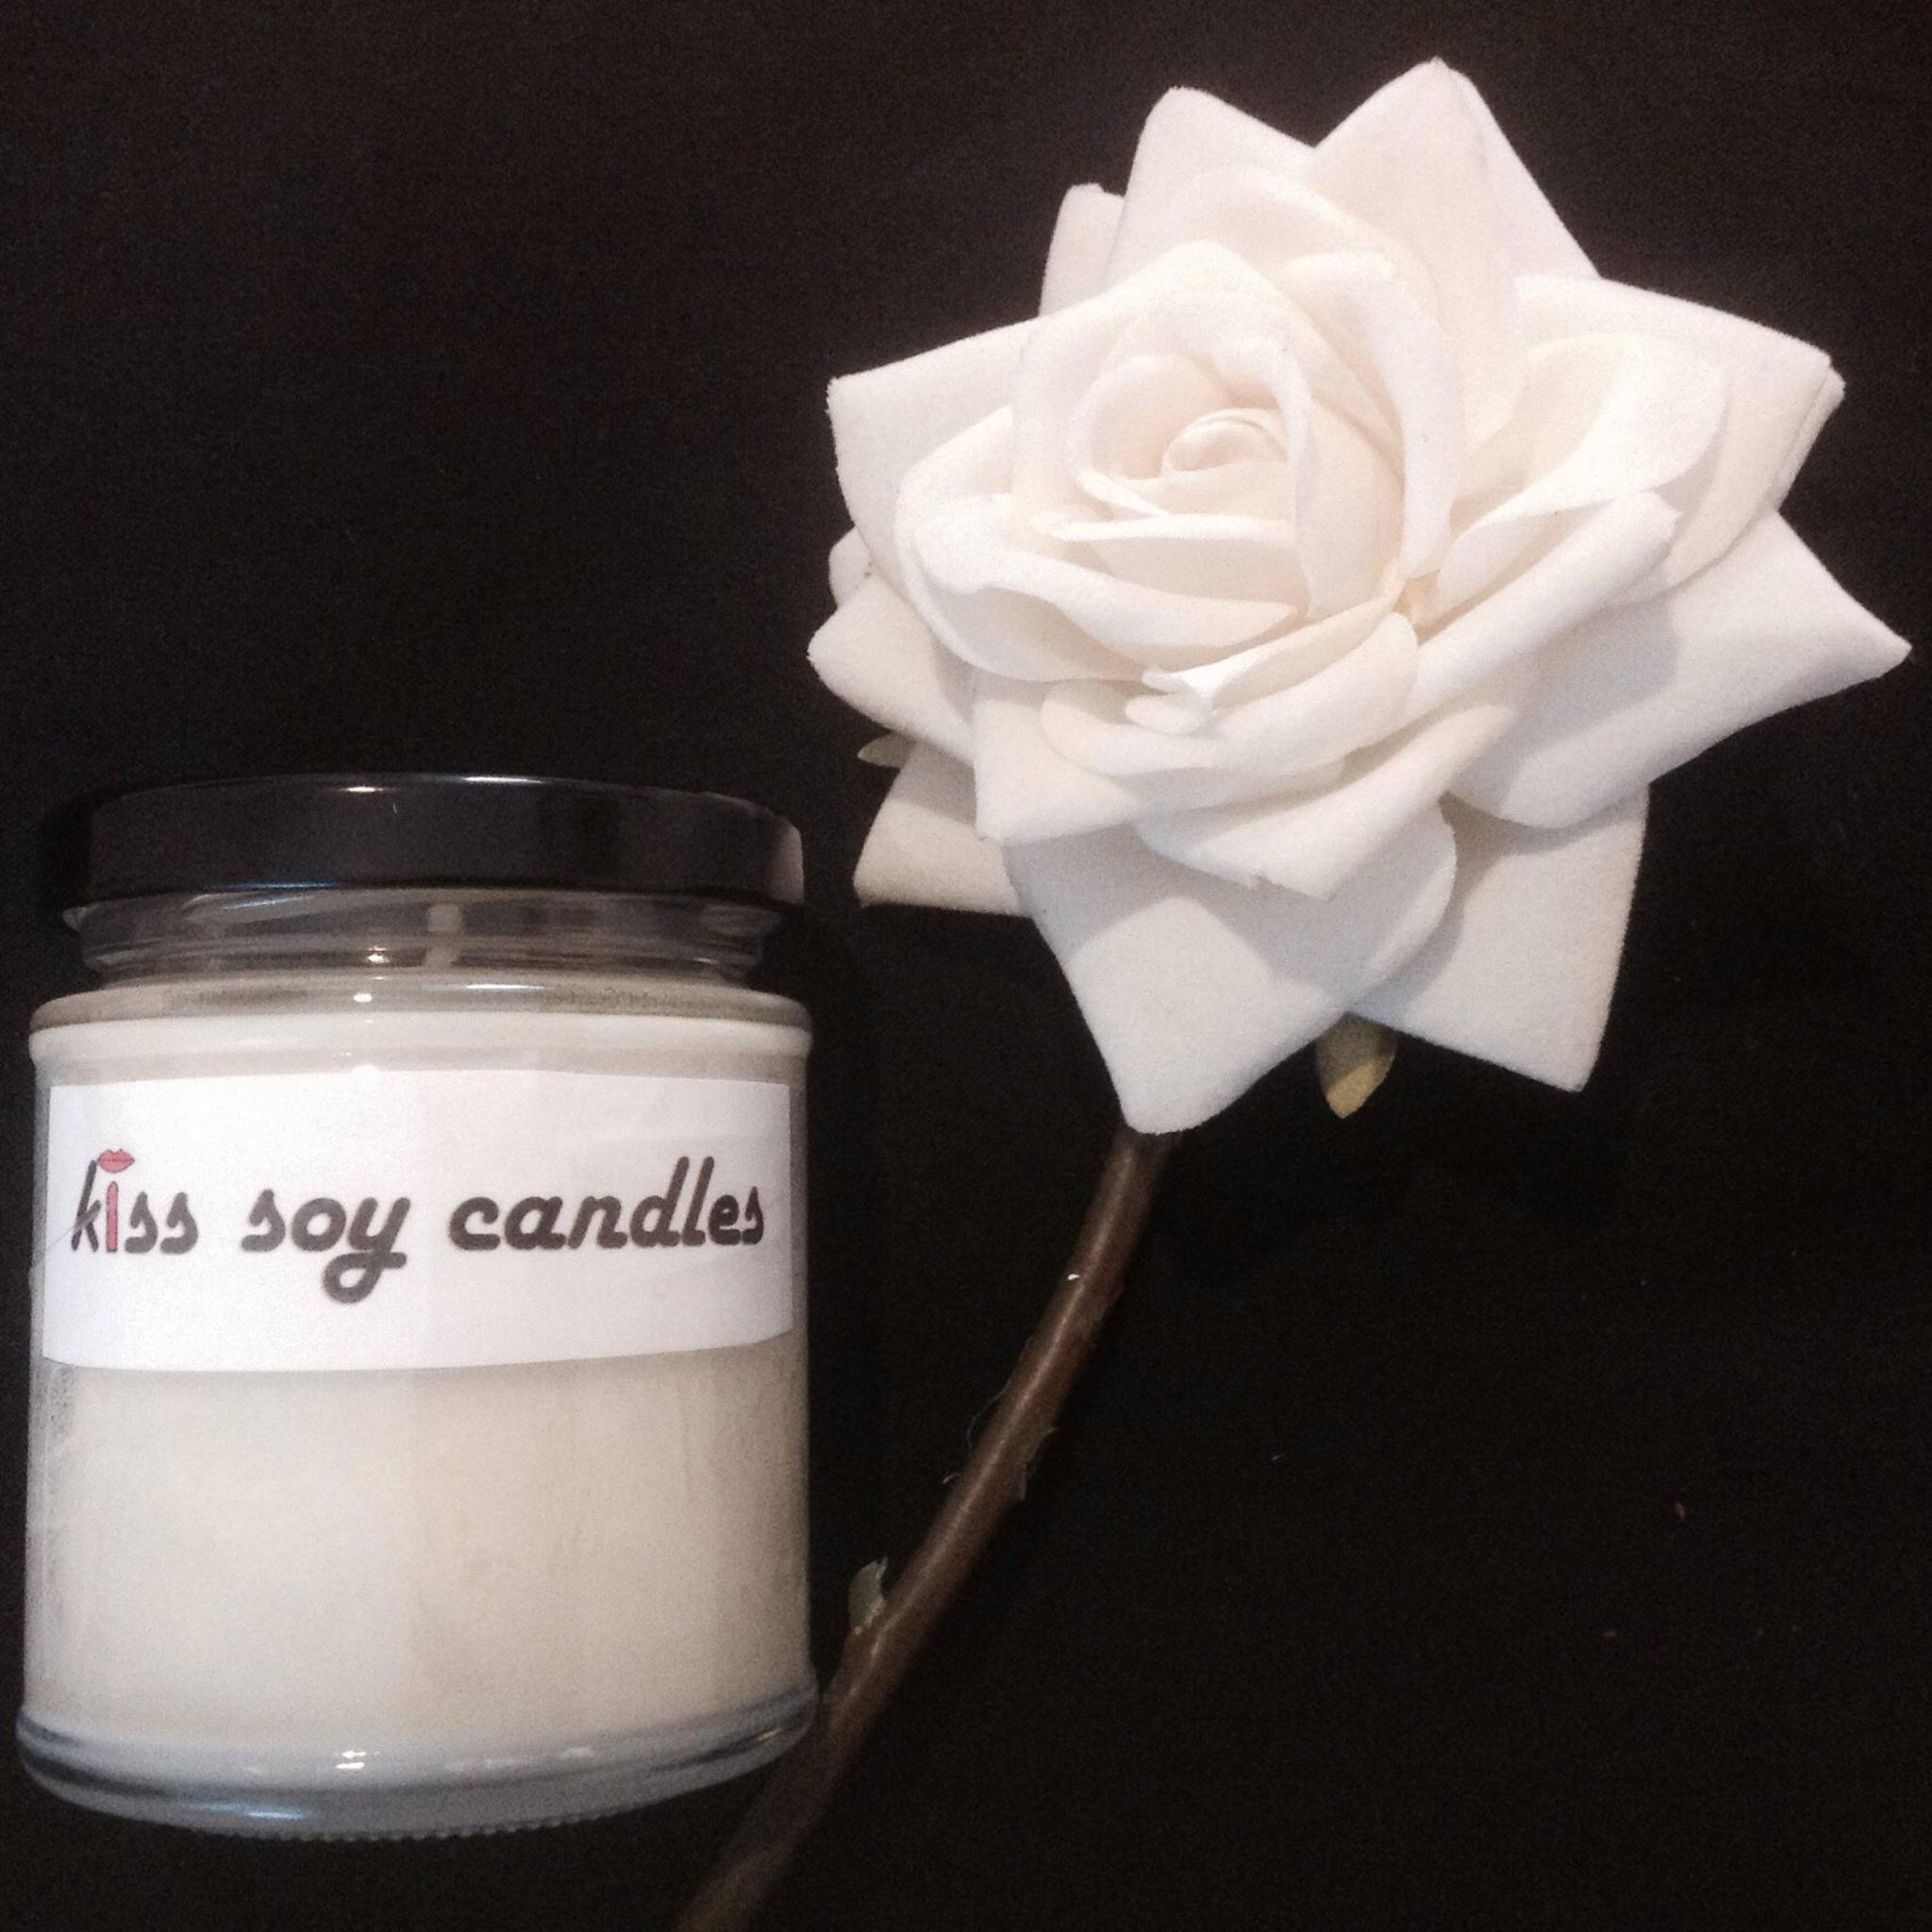 Kiss Soy Candles